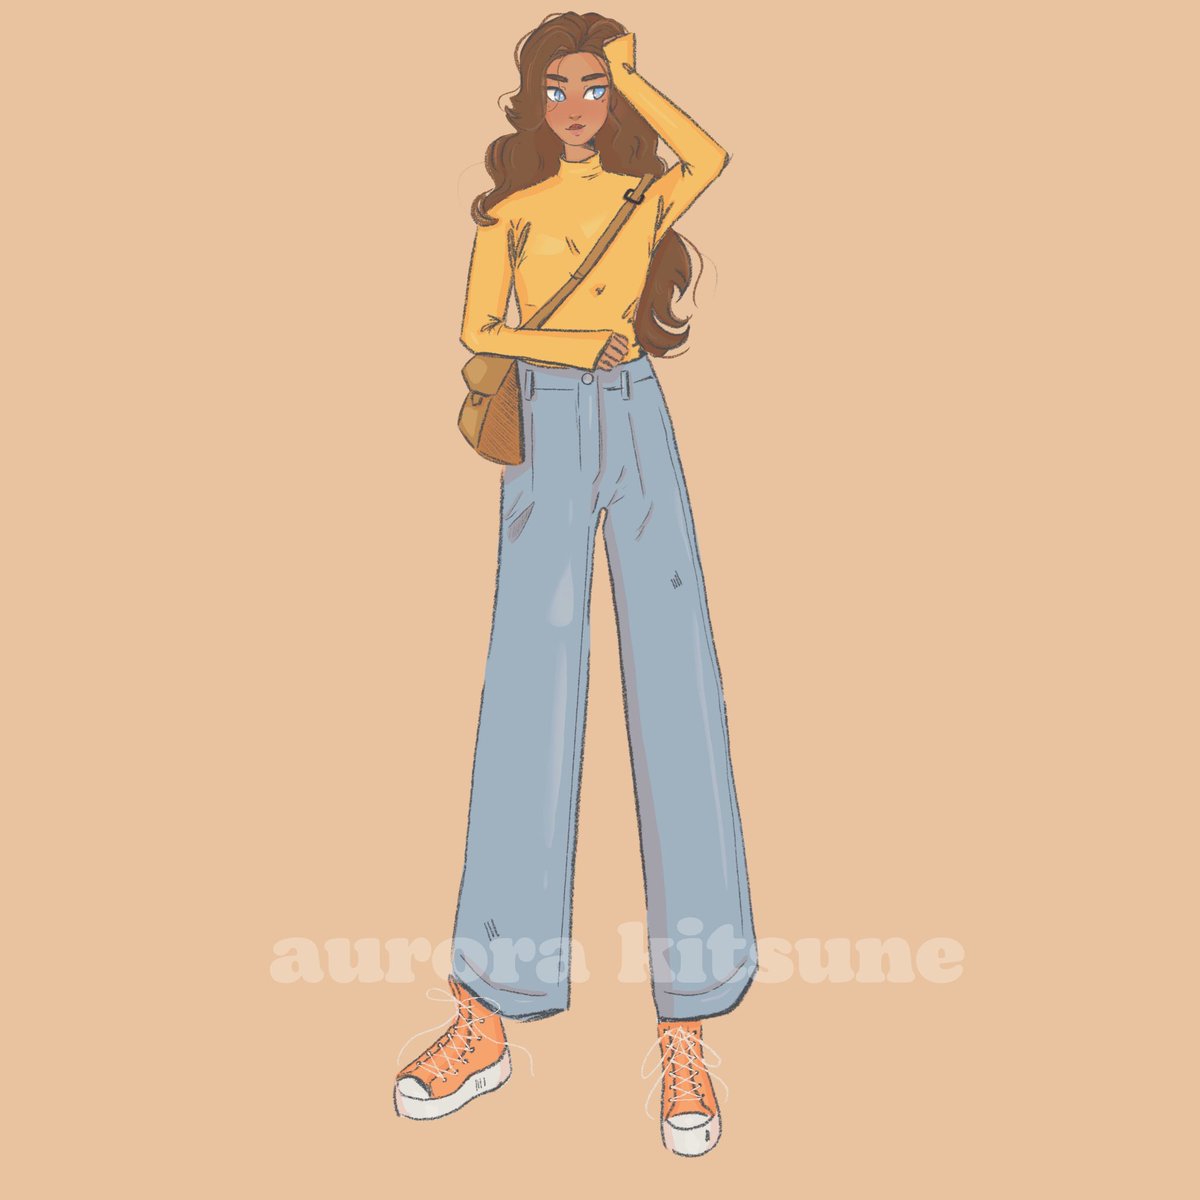 wait, what reality is this again? 😅🫠
.
.
.

.
#digitalillustration #digitalart #characterdesign #characterart #girlcharacter #cuteart #cuteartwork #cutearteveryday  #cozyart #neutralcolorpalette #warmcolors #warmcolorpalette #procreateillustration #artpose